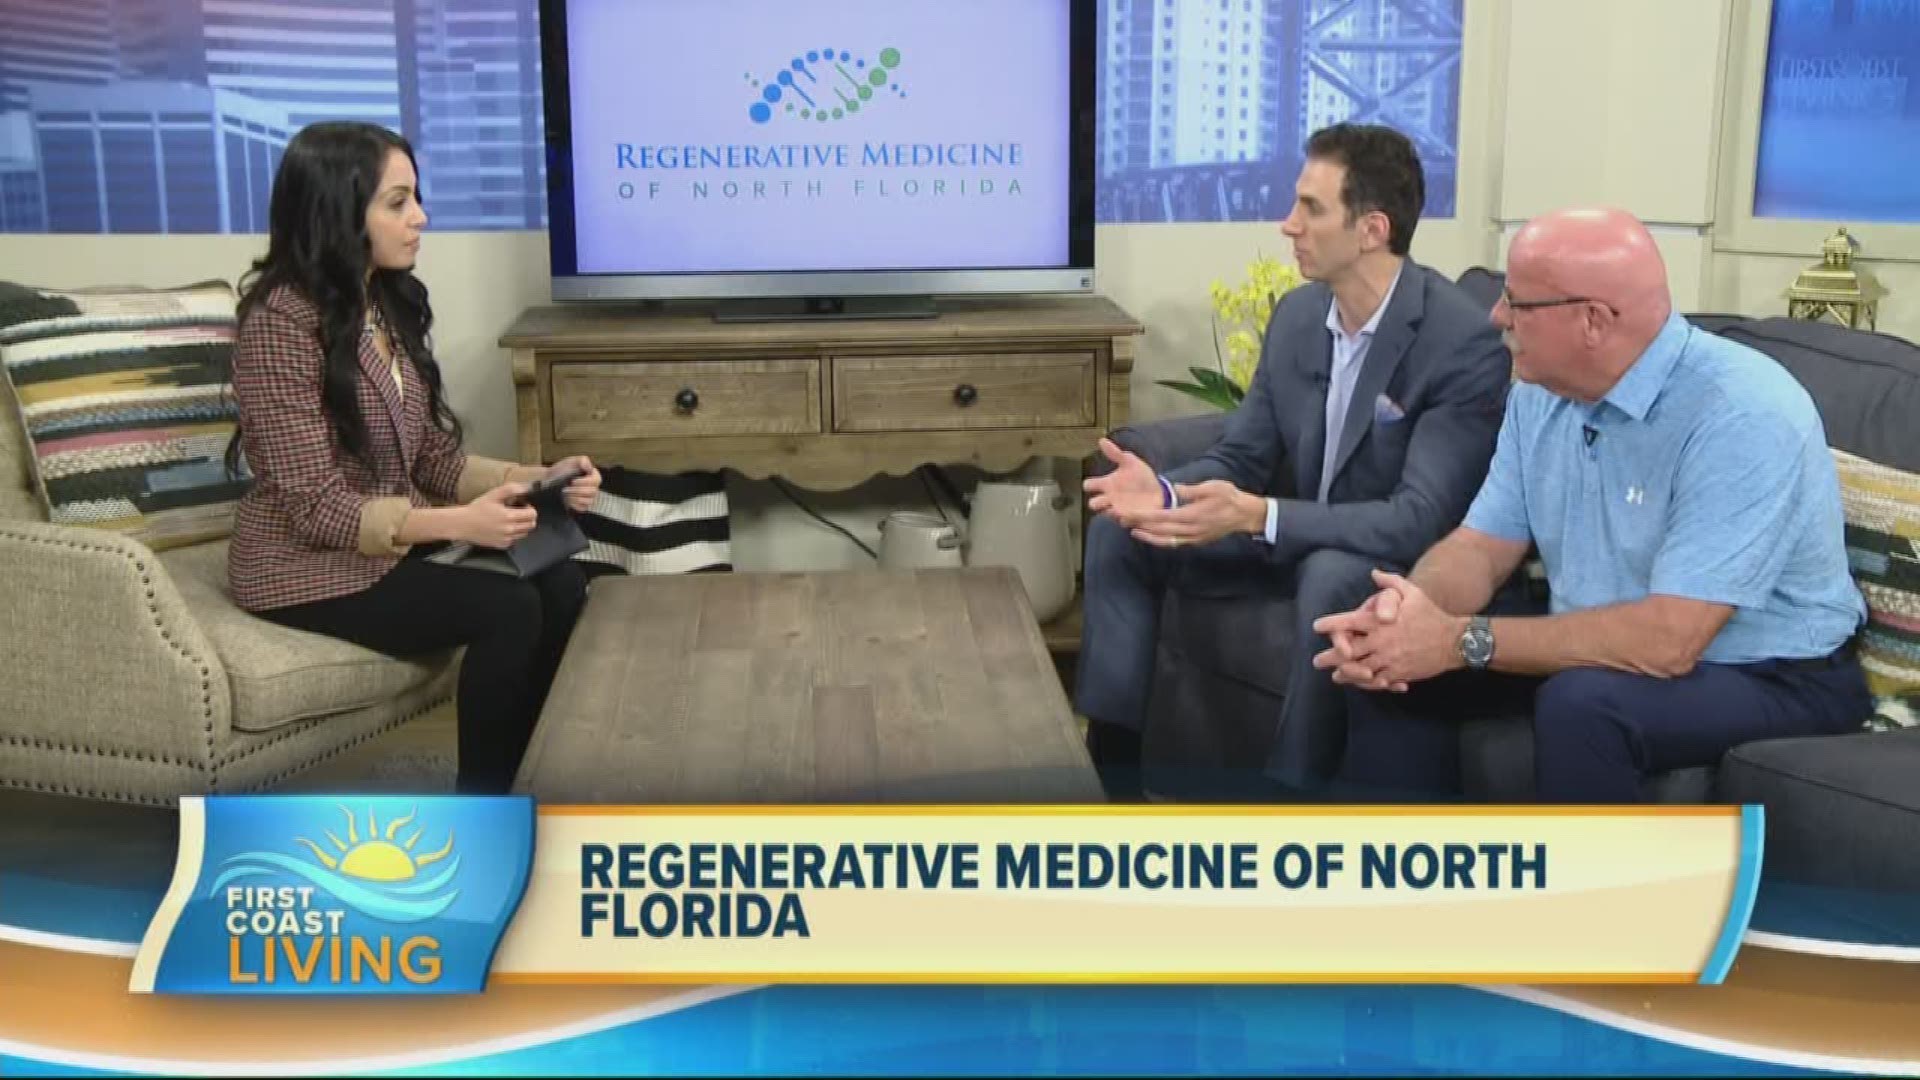 Doctor Rafael Foss discusses how stem cell therapy can help relieve joint pain without surgery or prescription drugs.